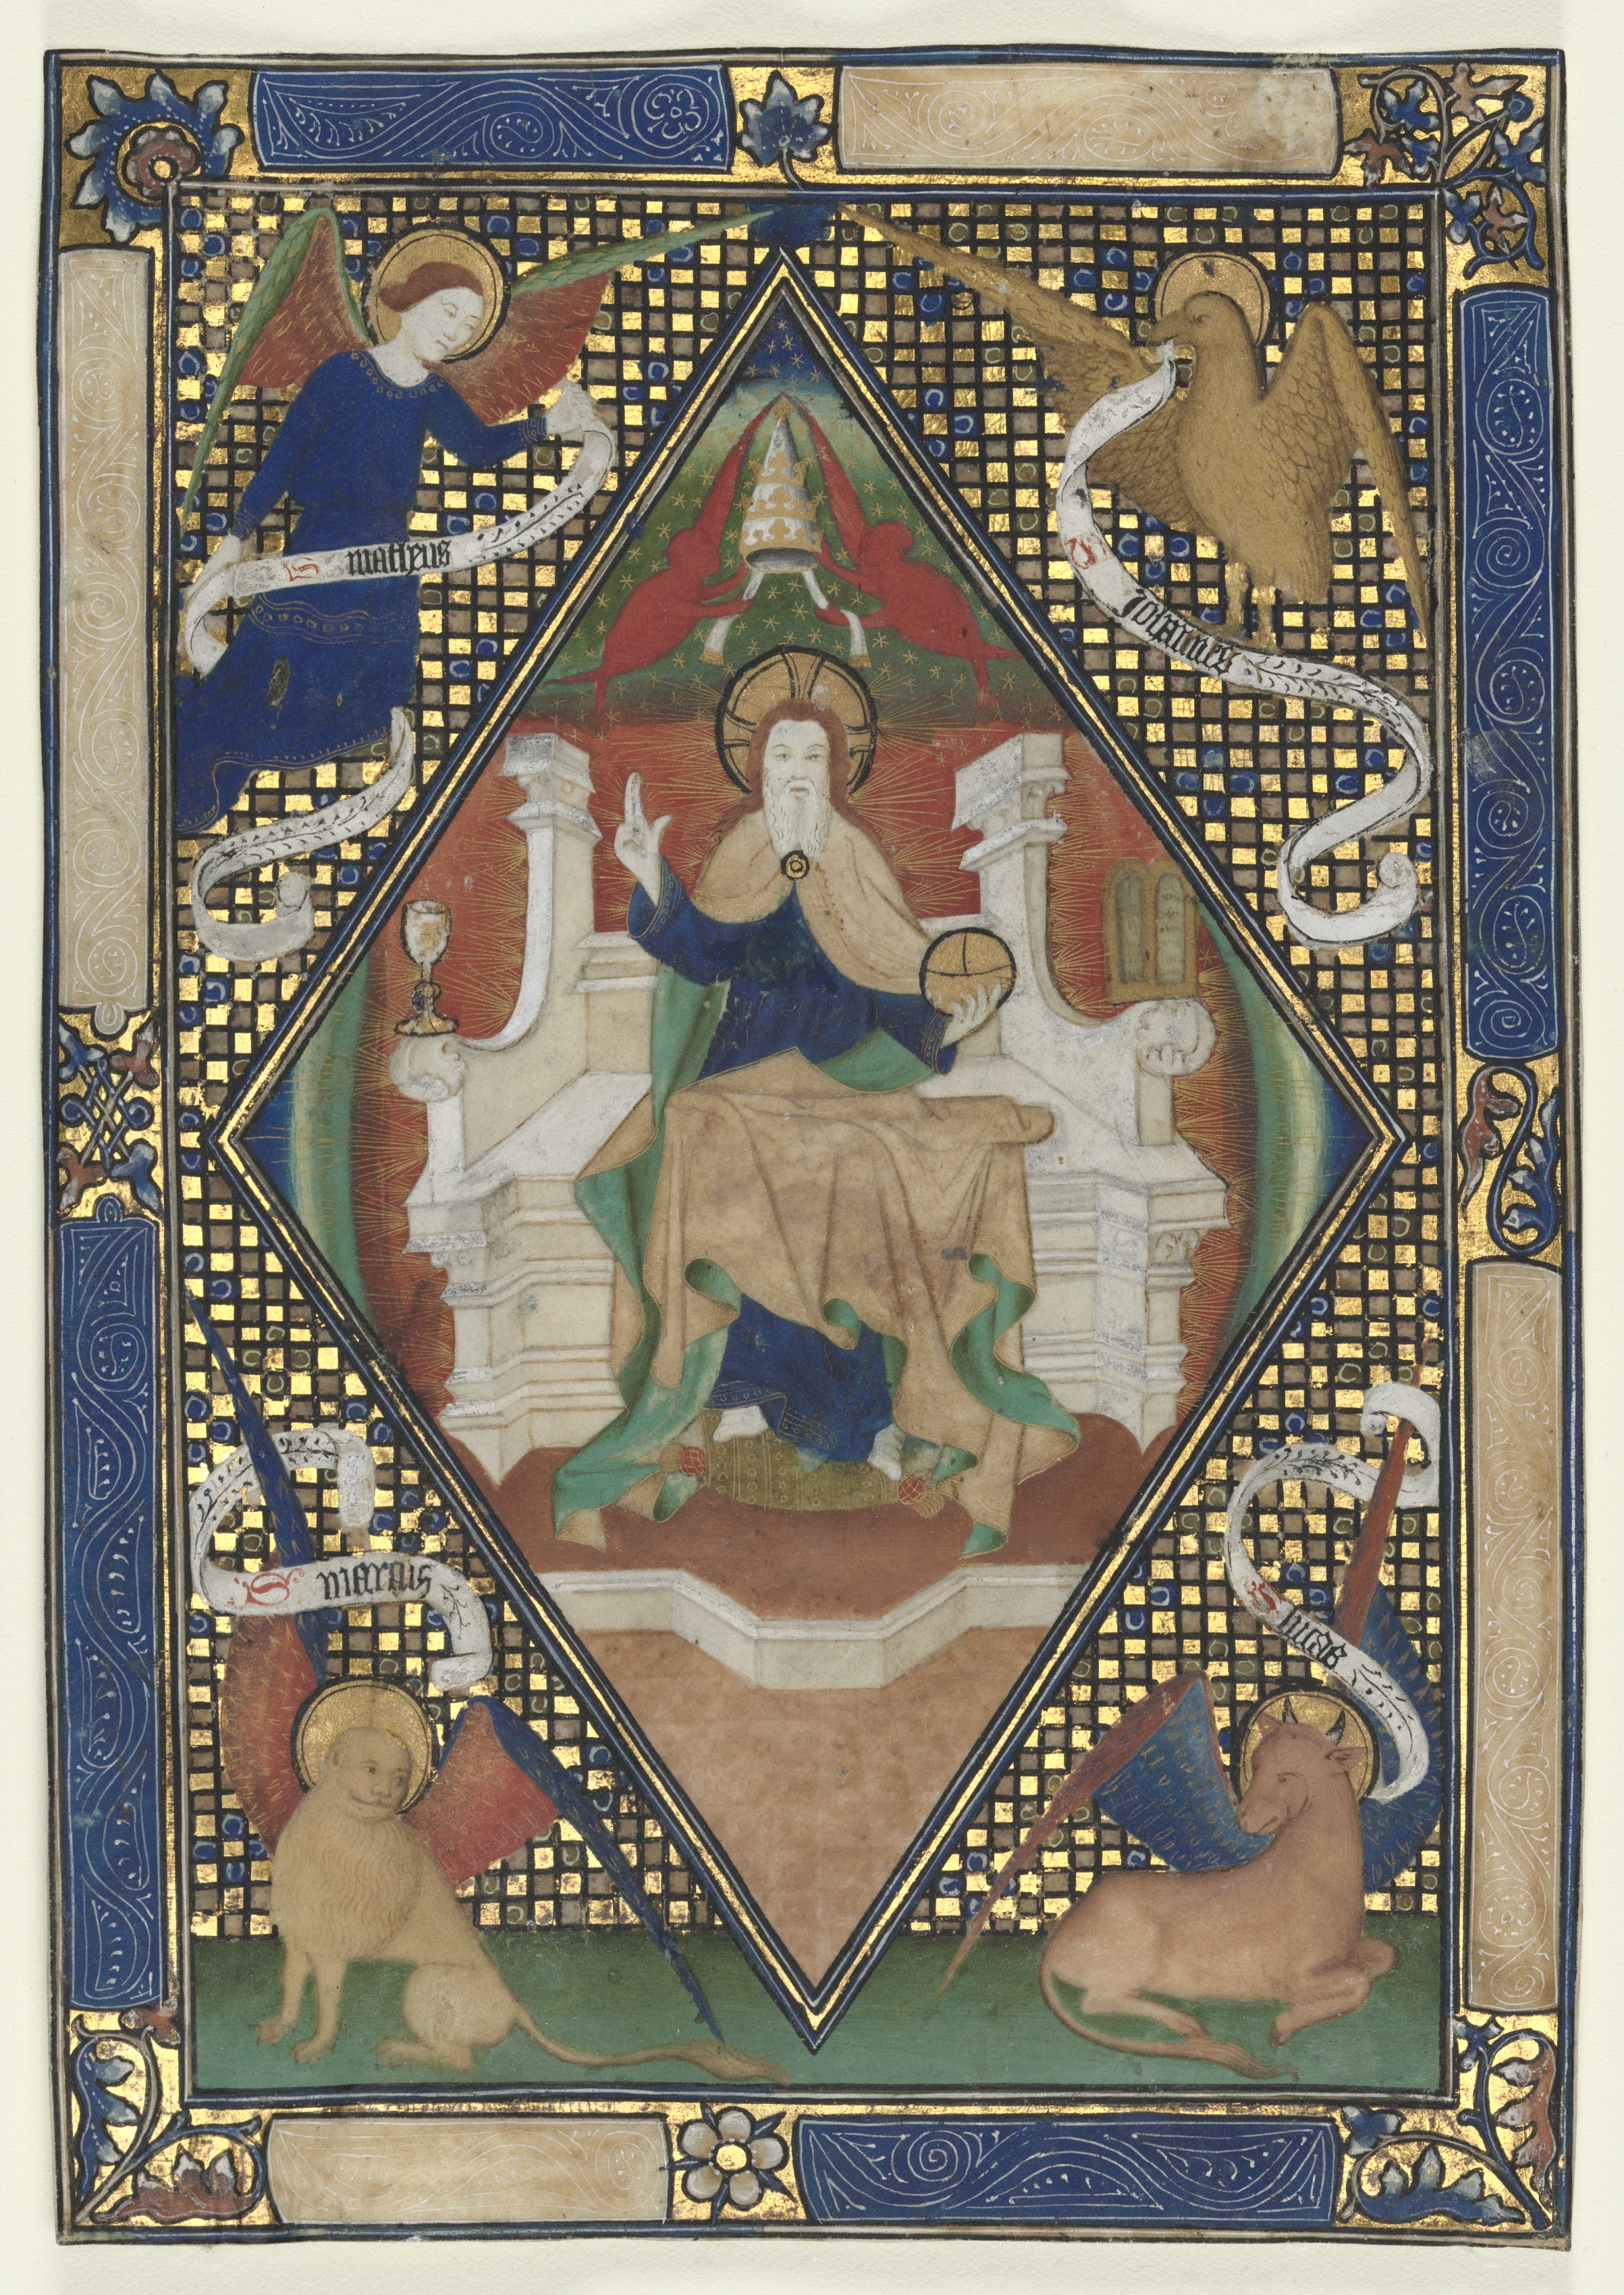 Canon Page from a Missal: Christ in Majesty with Evangelists